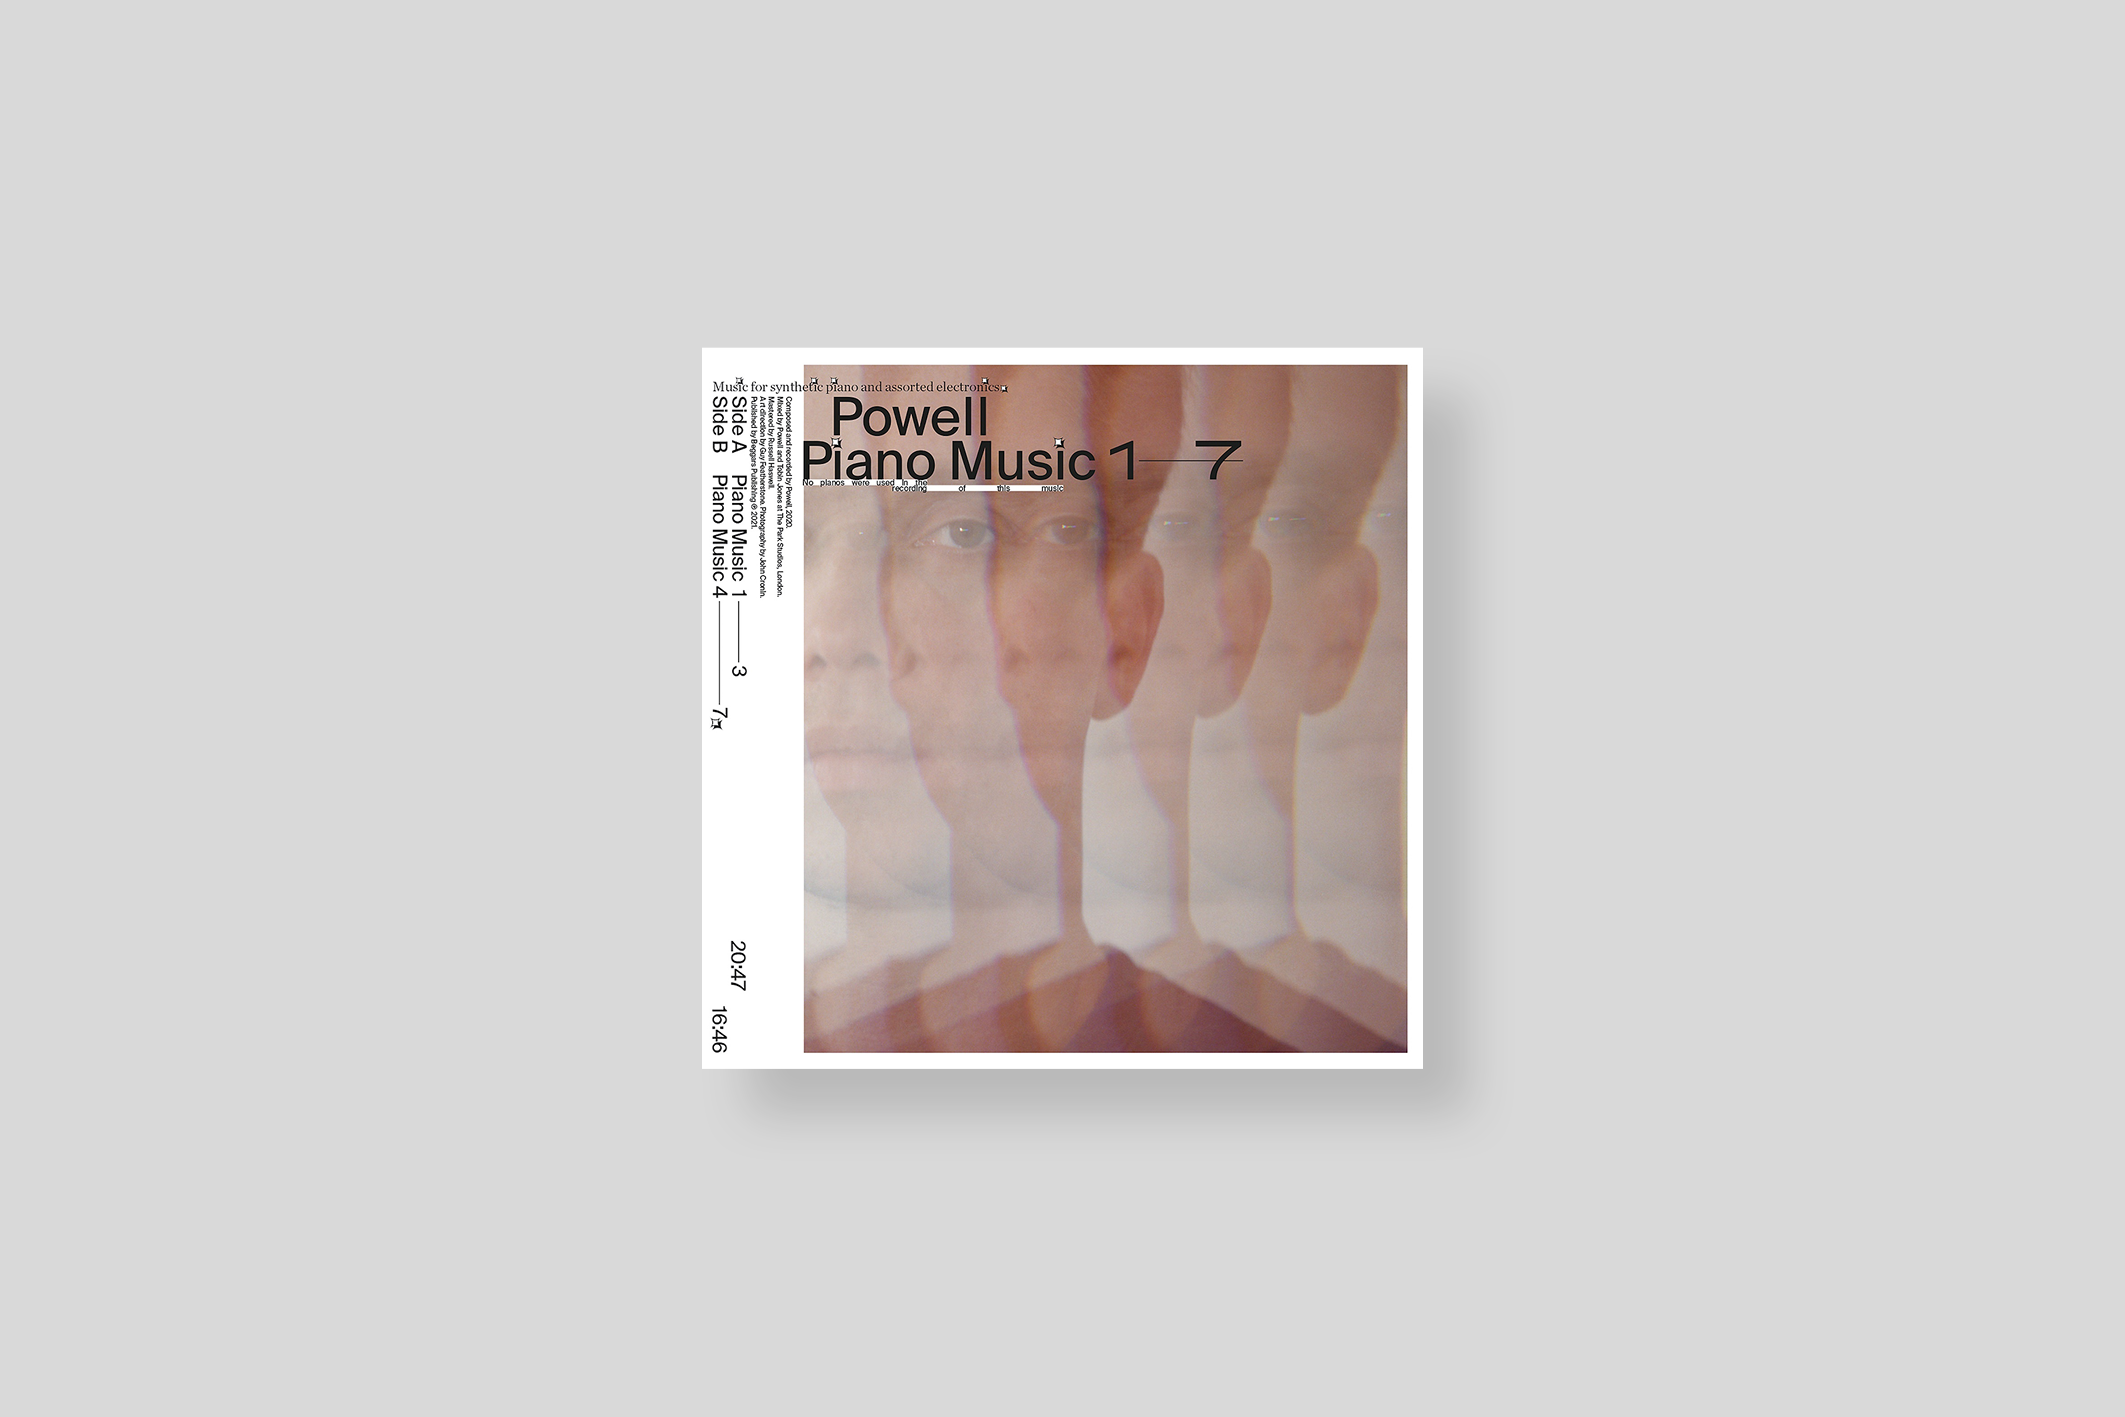 piano-music-1-7-music-for-synthetic-piano-and-assorted-electronics-vinyl-LP-powell-mego-cover